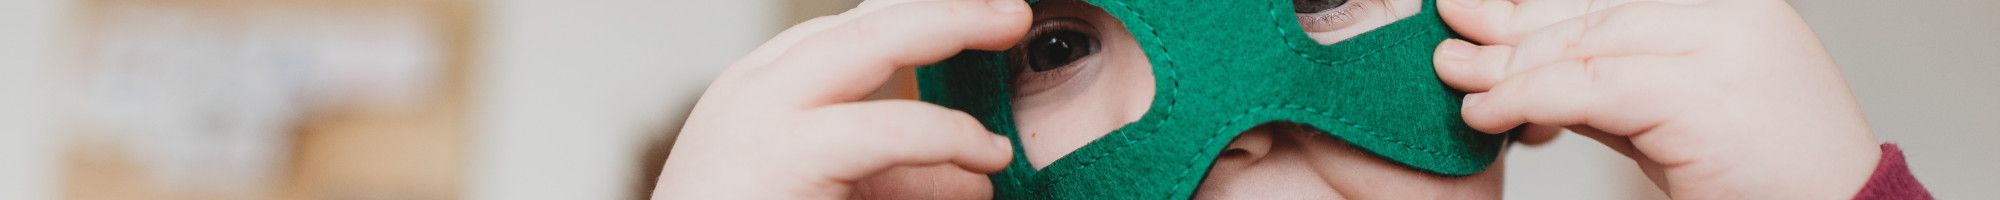 Image: a child wearing a green mask on his eyes